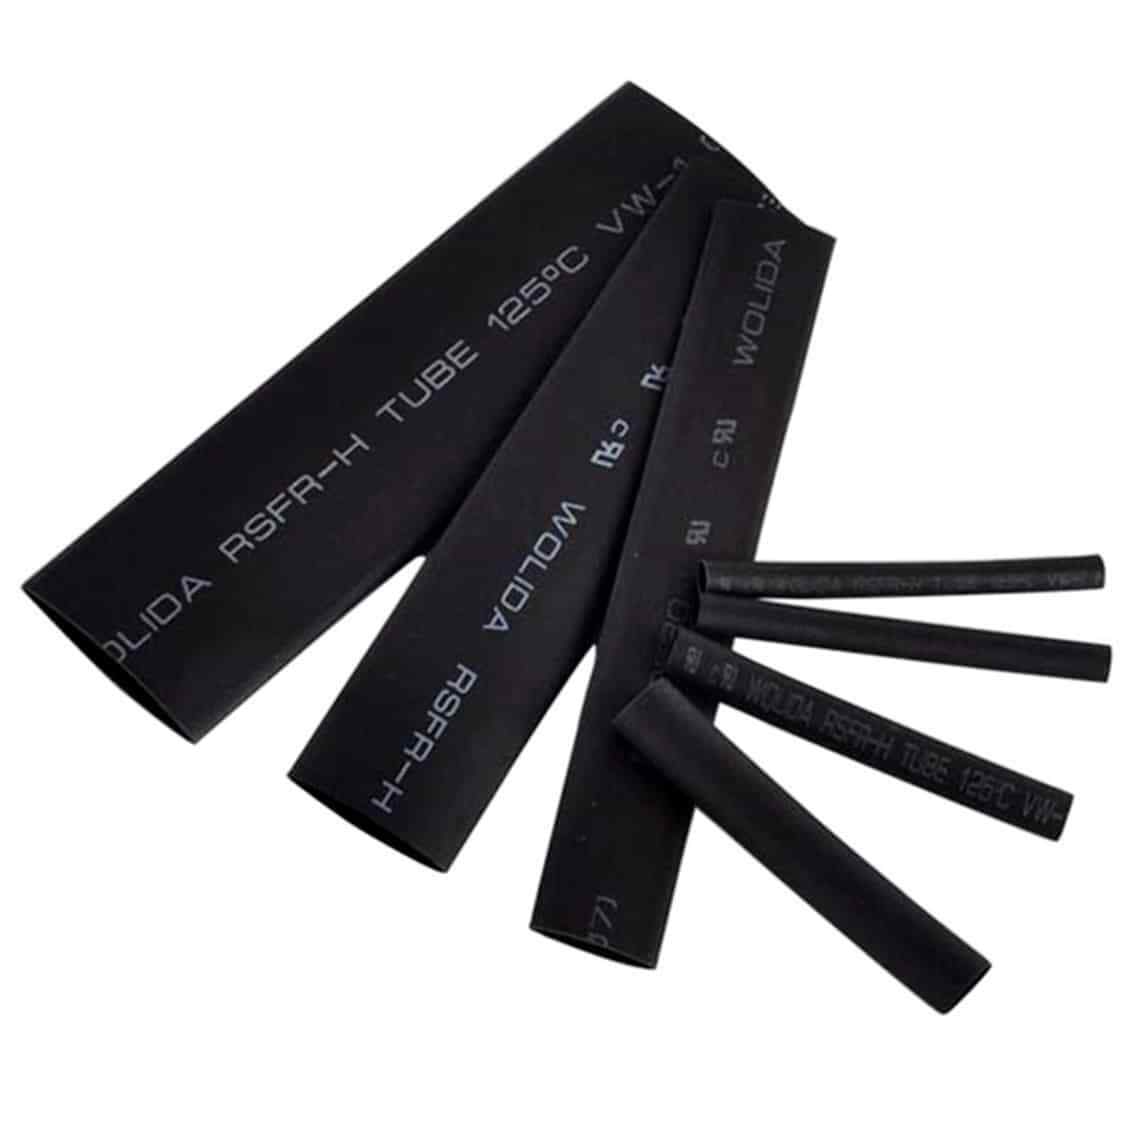 127 Piece Black Heat Shrink Tube Pack - Assorted Sizes